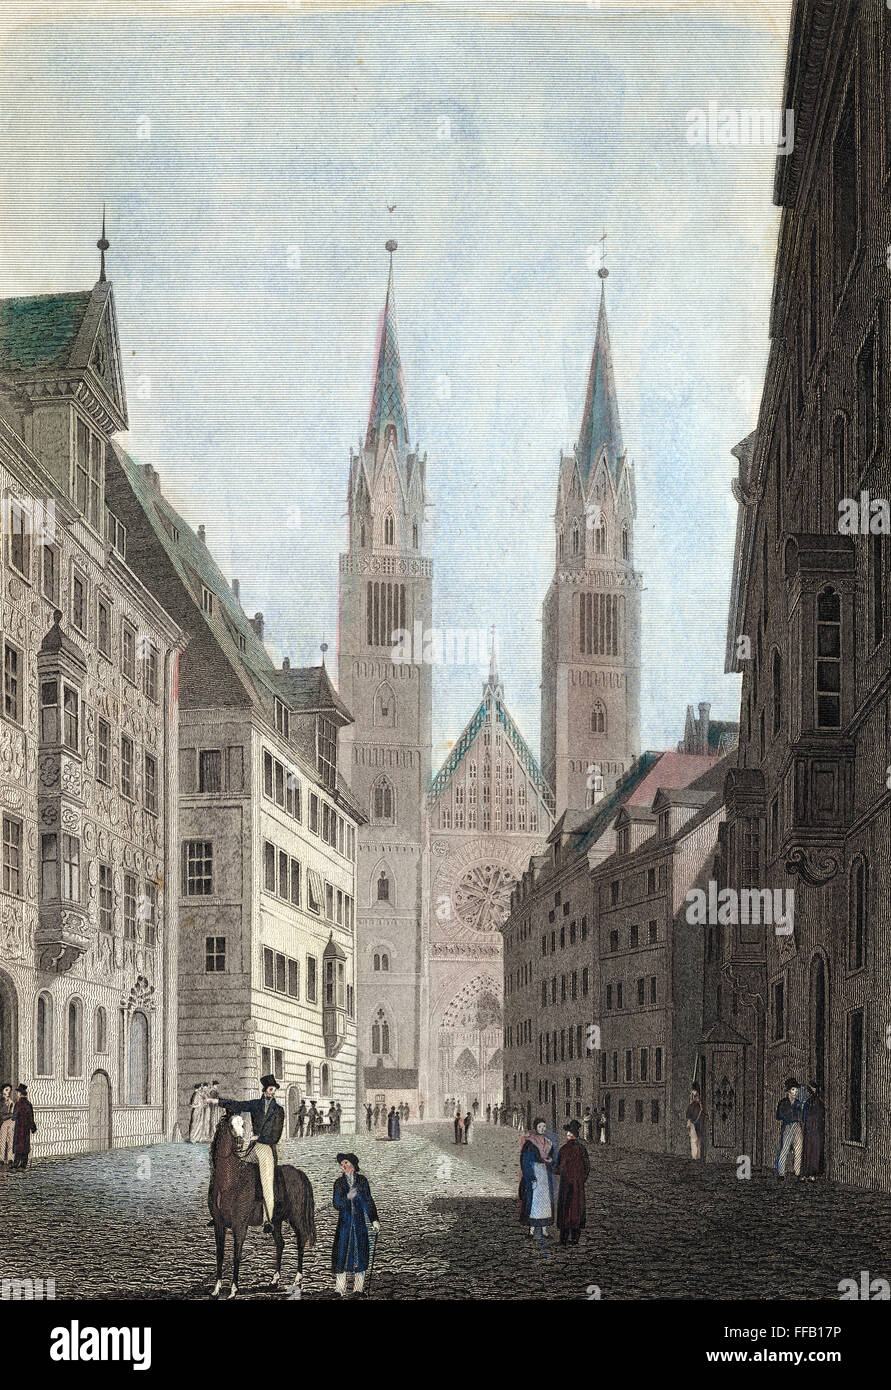 GERMANY: NUREMBERG, 1822. /nSt. Lorenz Kirche and Karolinen Strasse at Nuremberg, Germany. Steel engraving, 1822, after a drawing by Robert Batty. Stock Photo